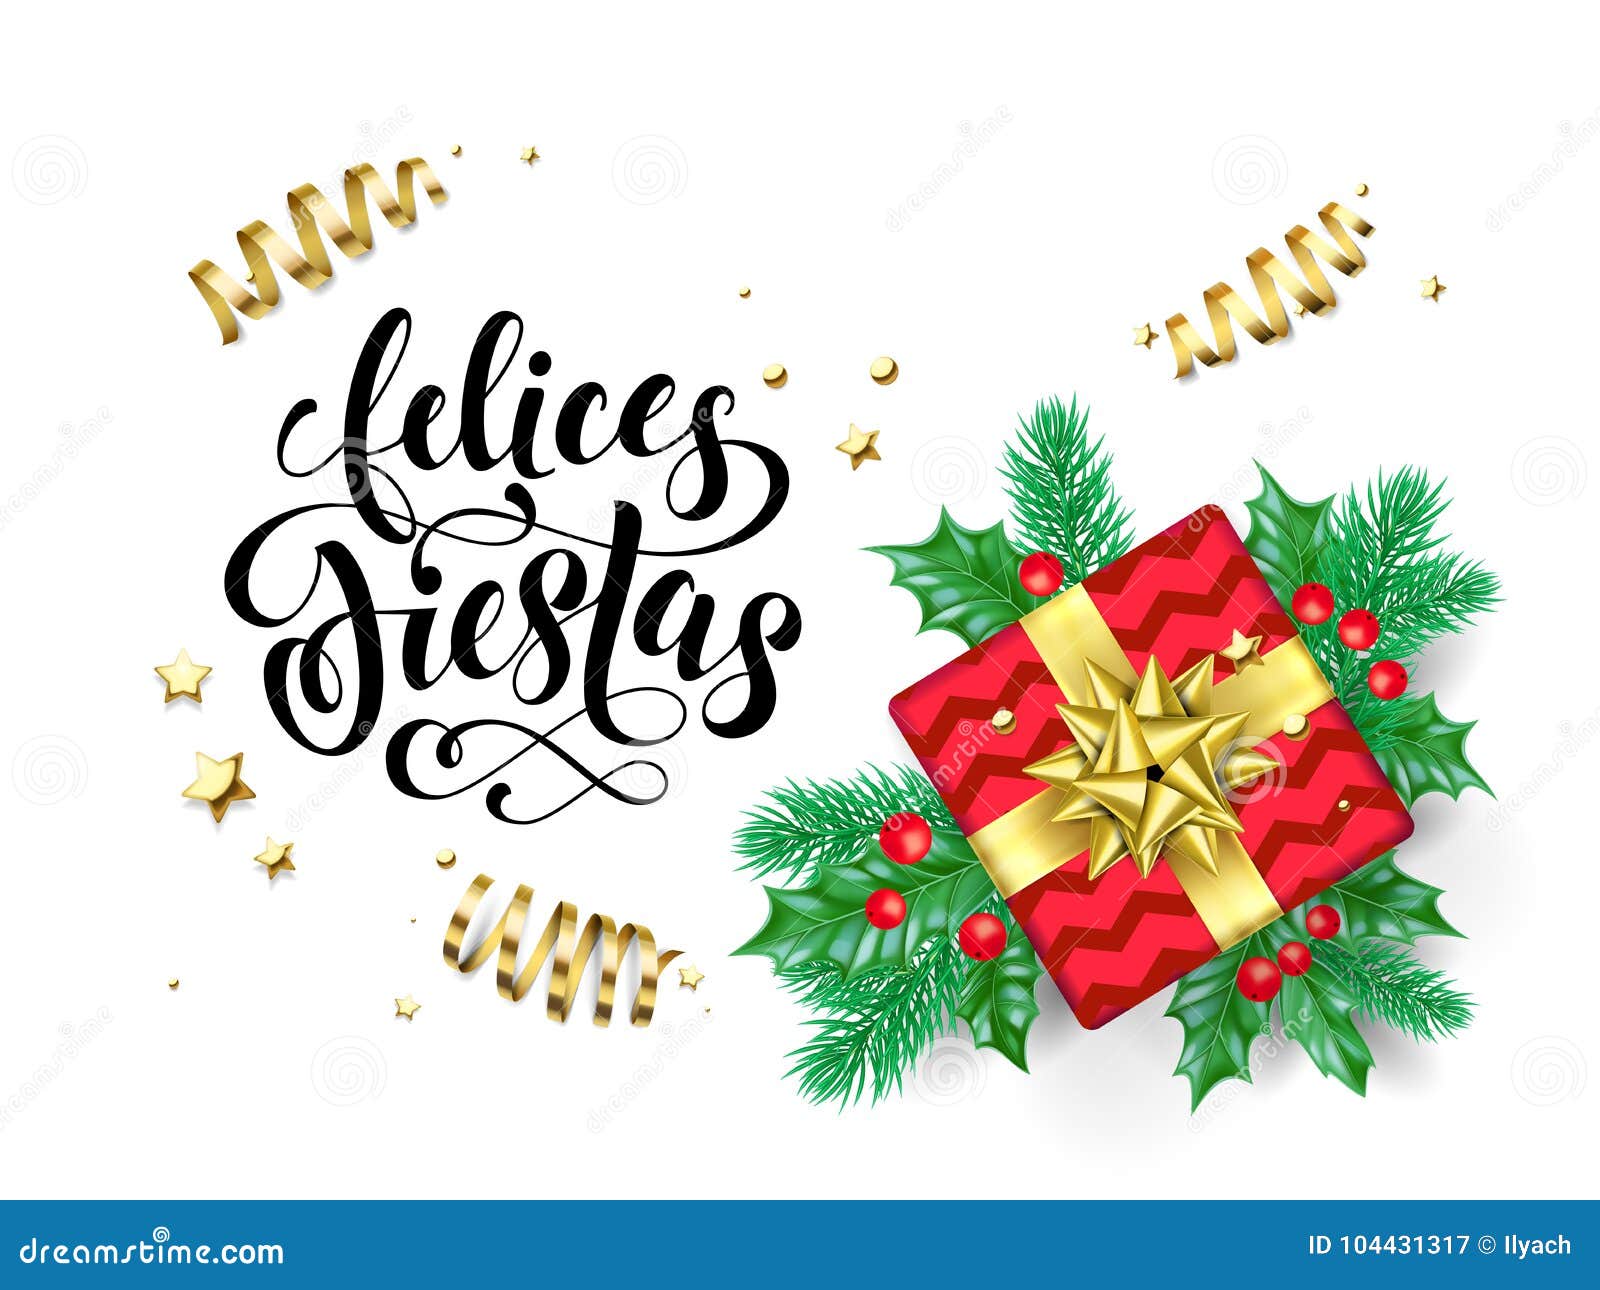 Royalty Free Vector Download Felices Fiestas Spanish Happy Holidays Calligraphy Hand Drawn Text For Greeting Card Background Template